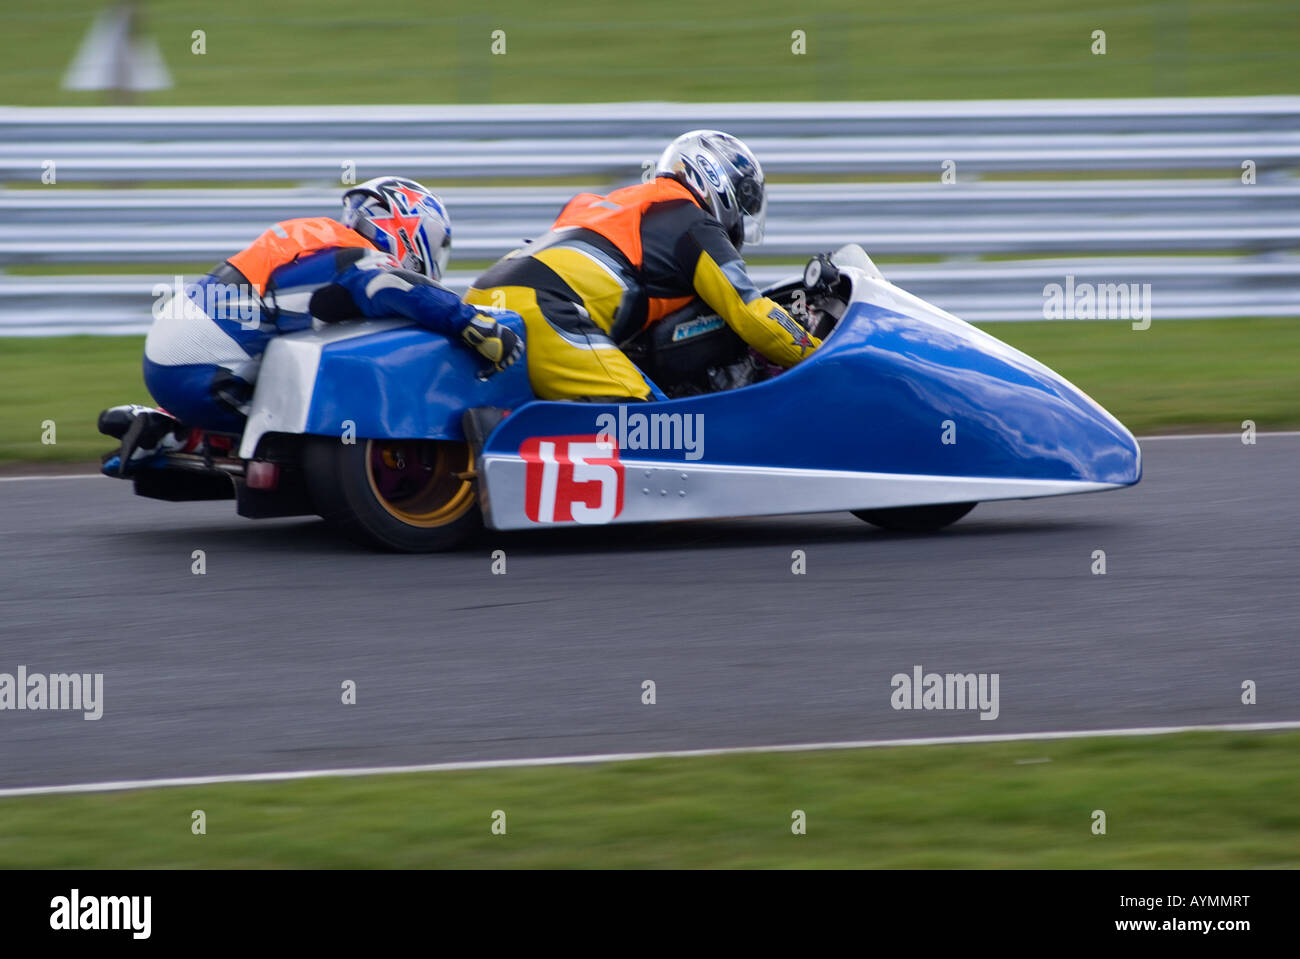 Motorbike and Sidecar at Wirral 100 Motor Club Race Meeting at Oulton Park Motor Racing Circuit Cheshire England Stock Photo